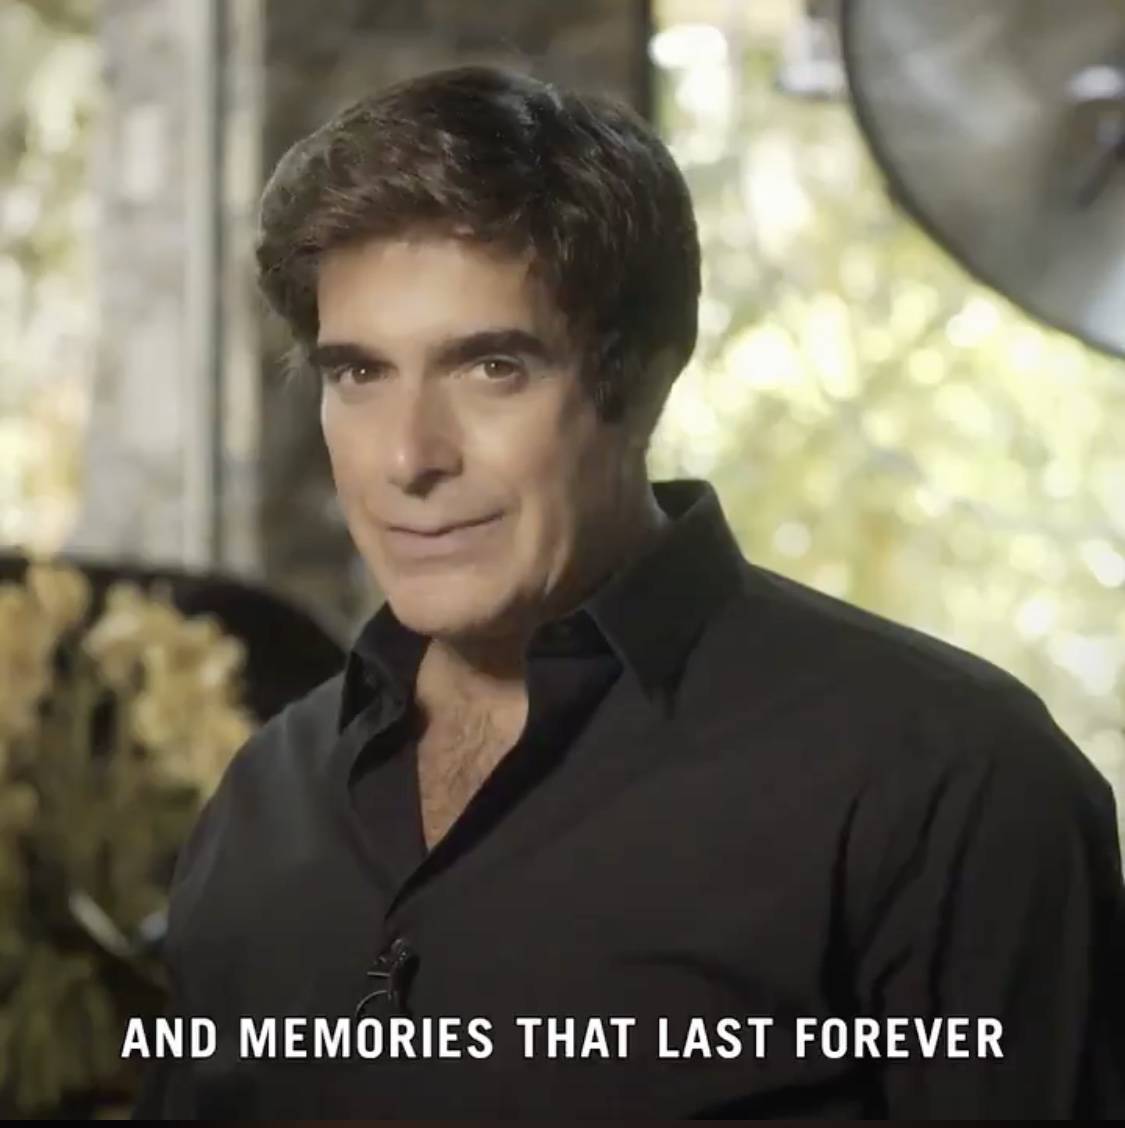 Magician legend David Copperfield is shown in a new social media campaign launched by MGM Resor ...